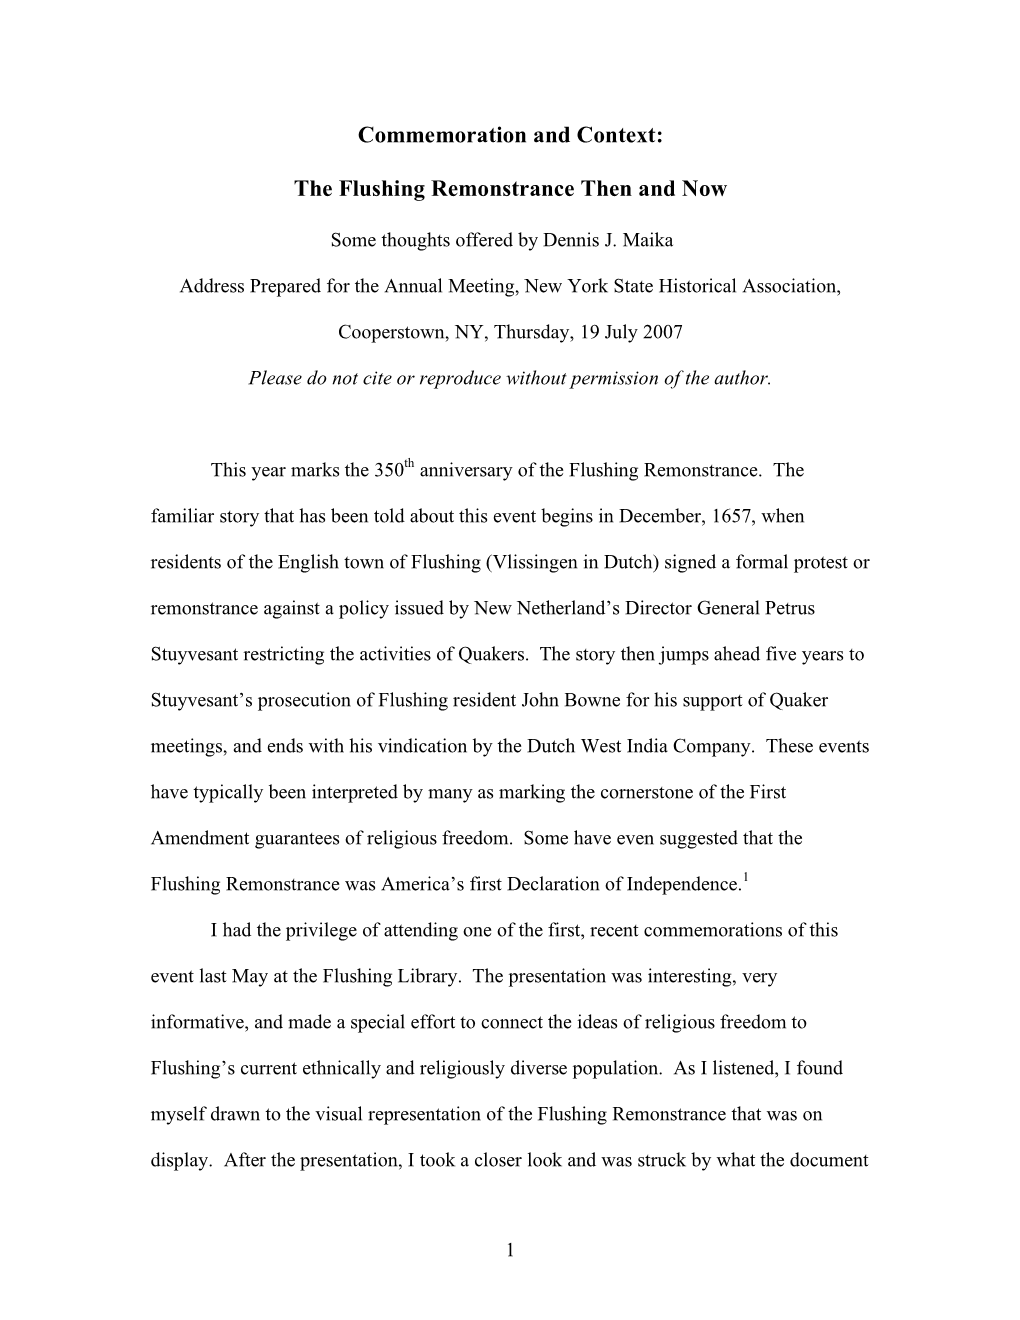 Commemoration and Context: the Flushing Remonstrance Then And